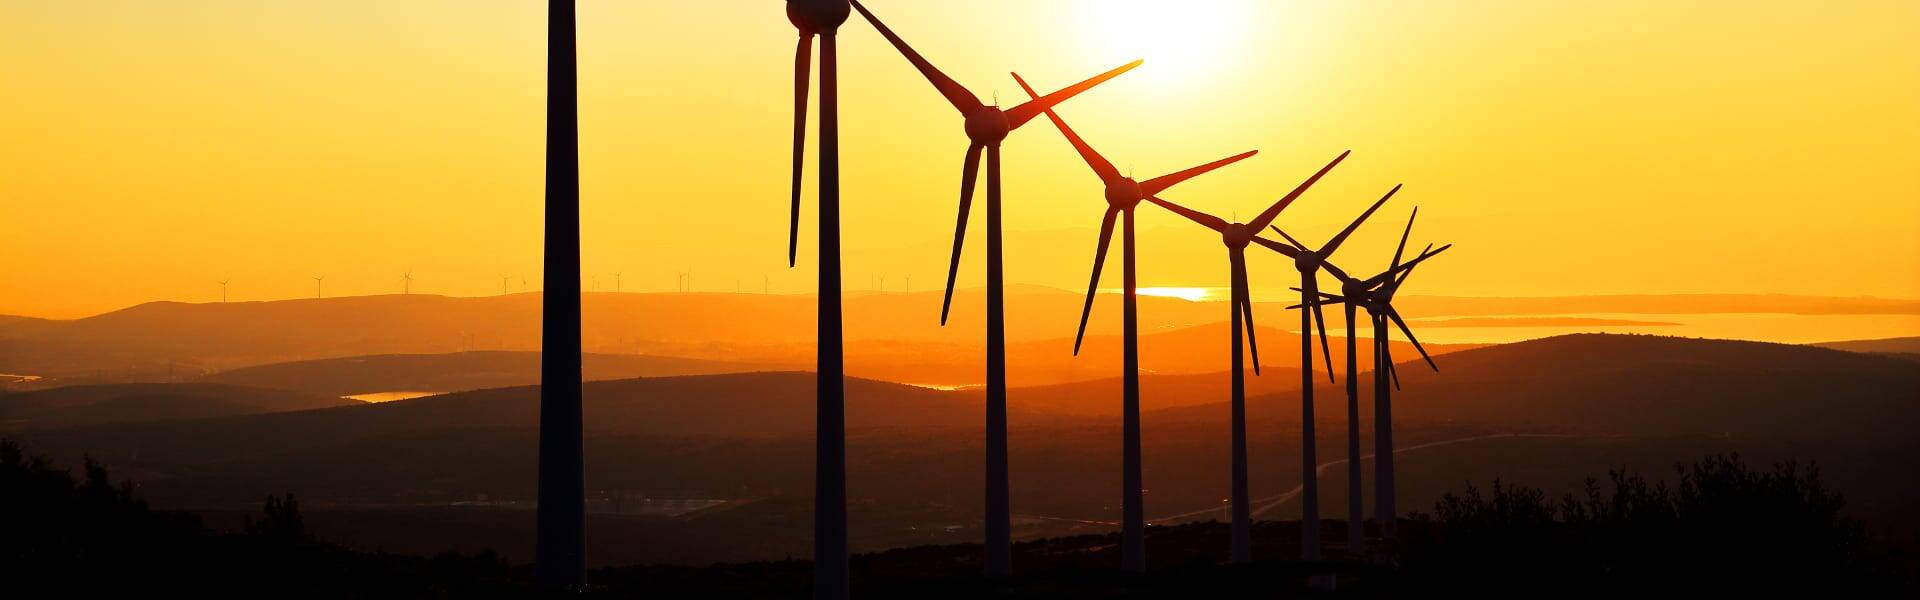 Renewed support for onshore wind and solar draws investors to UK